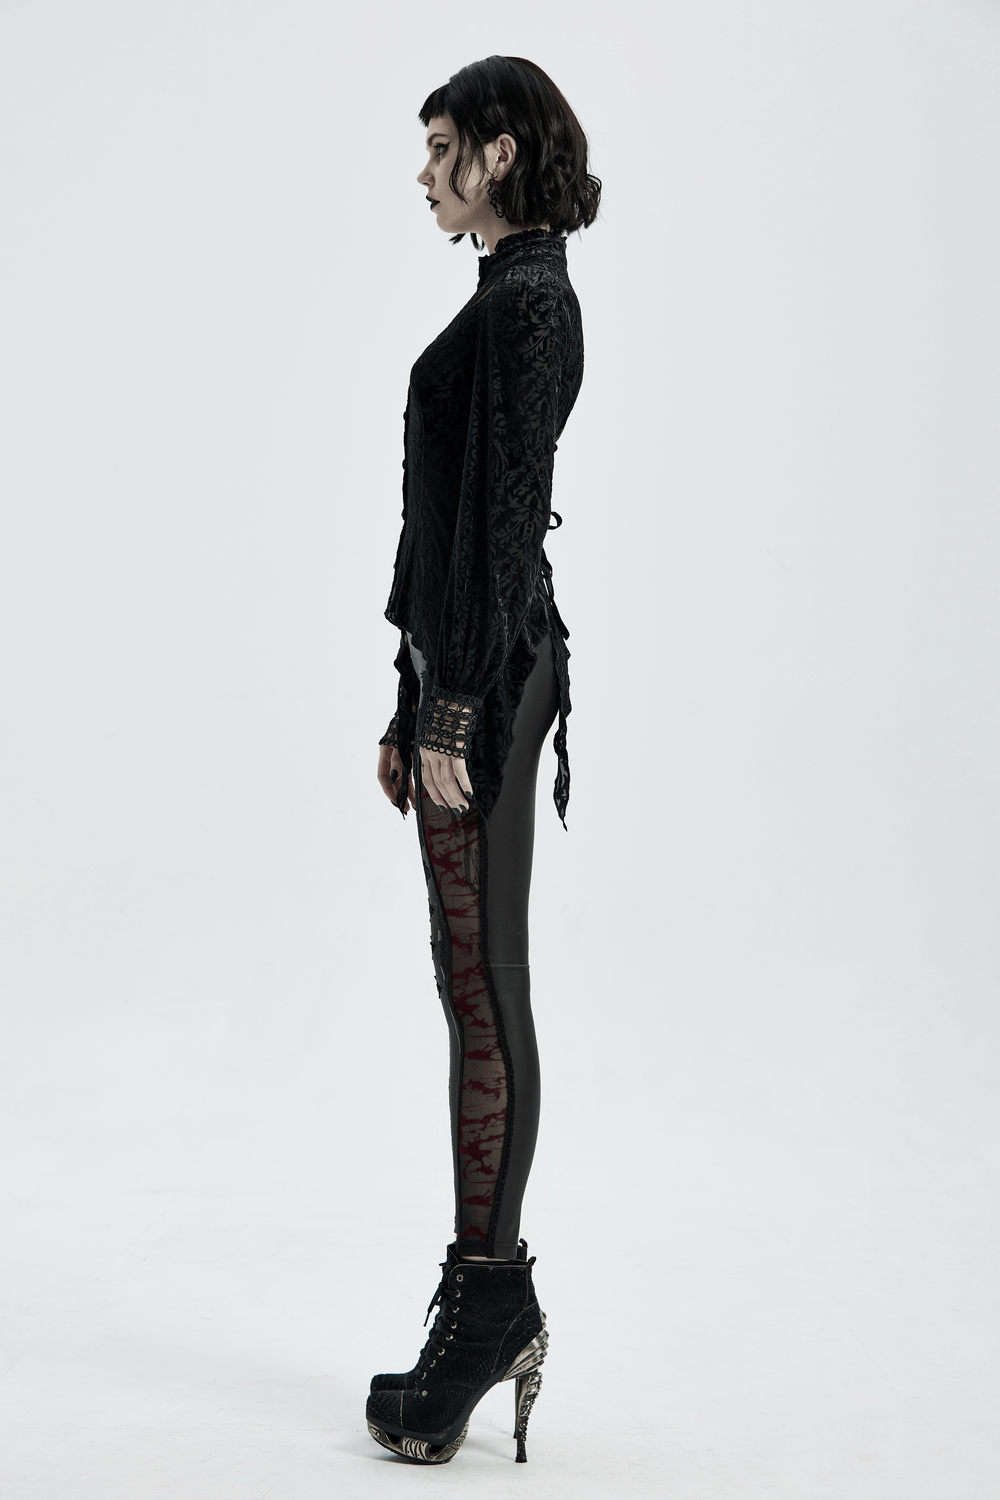 Black Gothic Leggings with Lace Detail and Side Mesh Panels